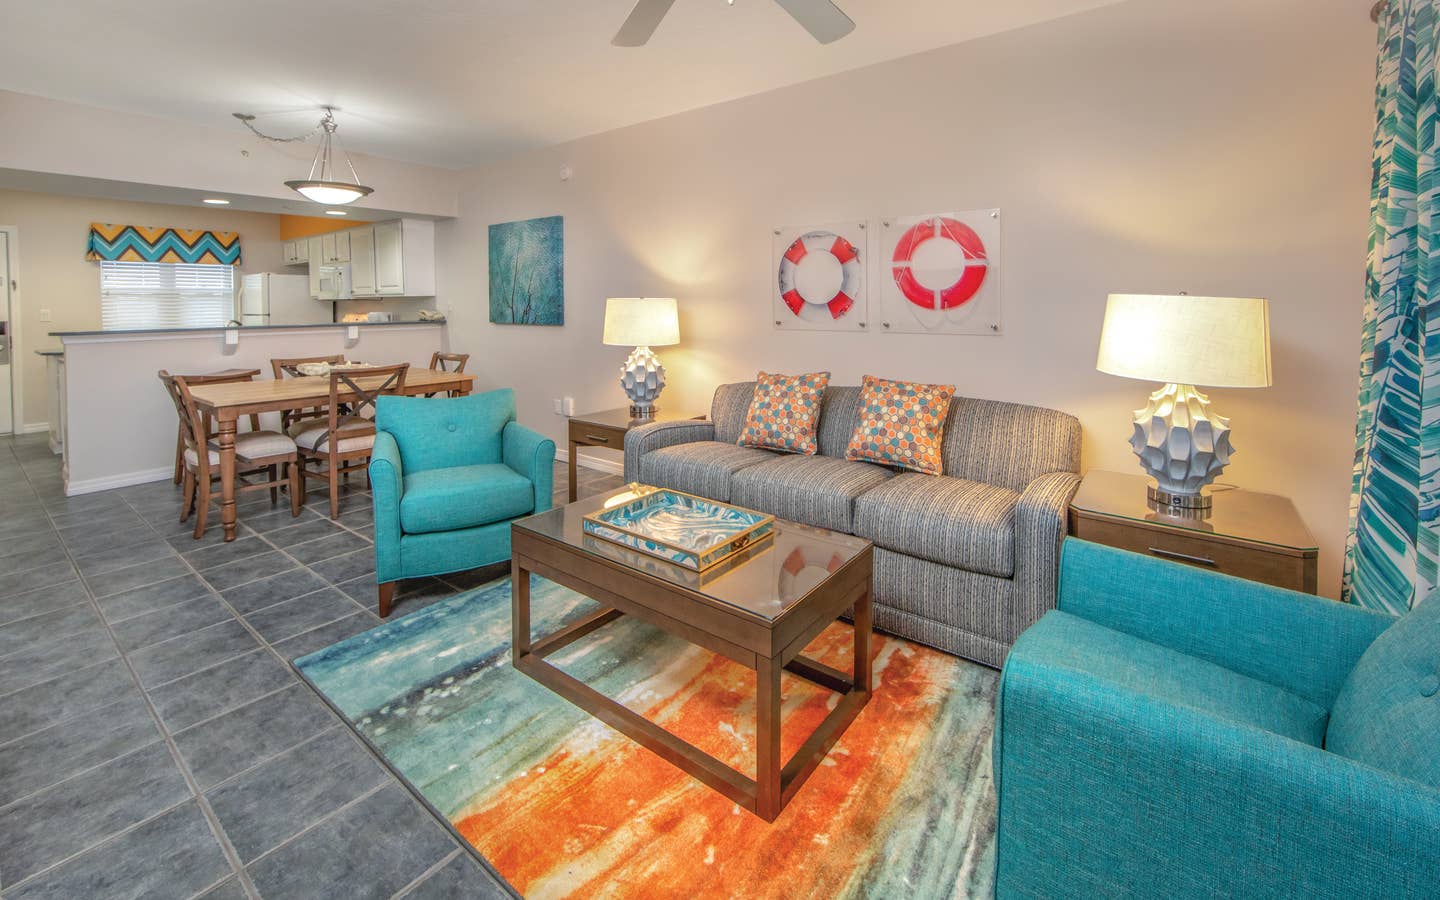 Living room with couch, two accent chairs, and coastal decor in a one-bedroom villa at Panama City Beach Resort